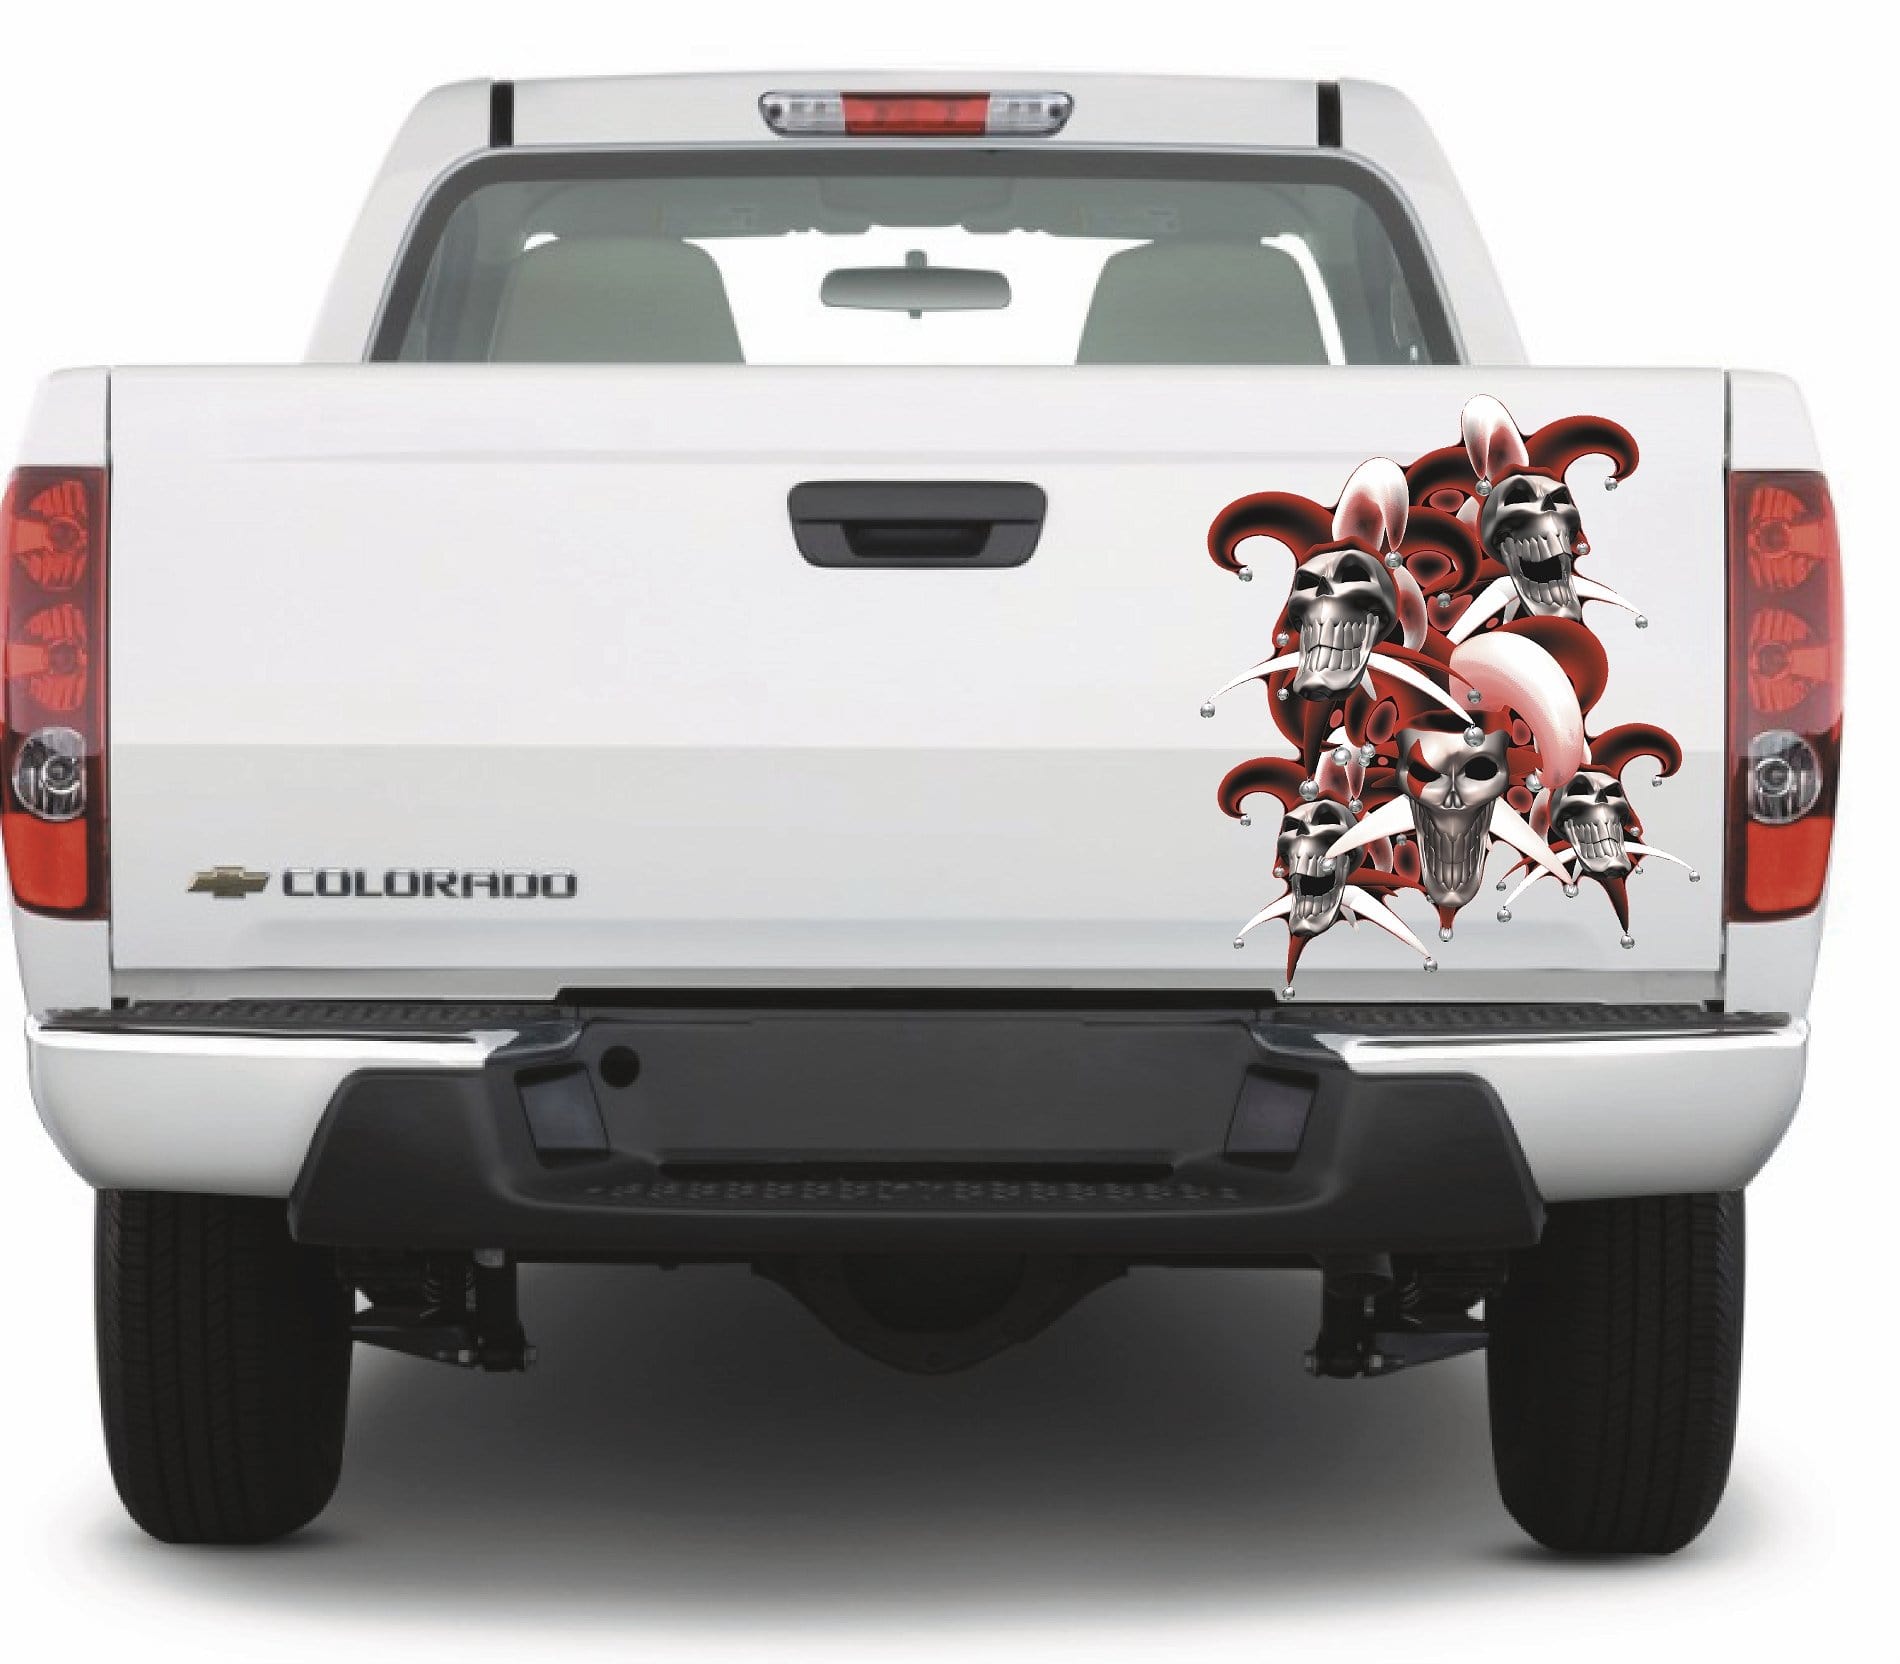 Chrome Grill Flame Vinyl Auto Graphic Decals